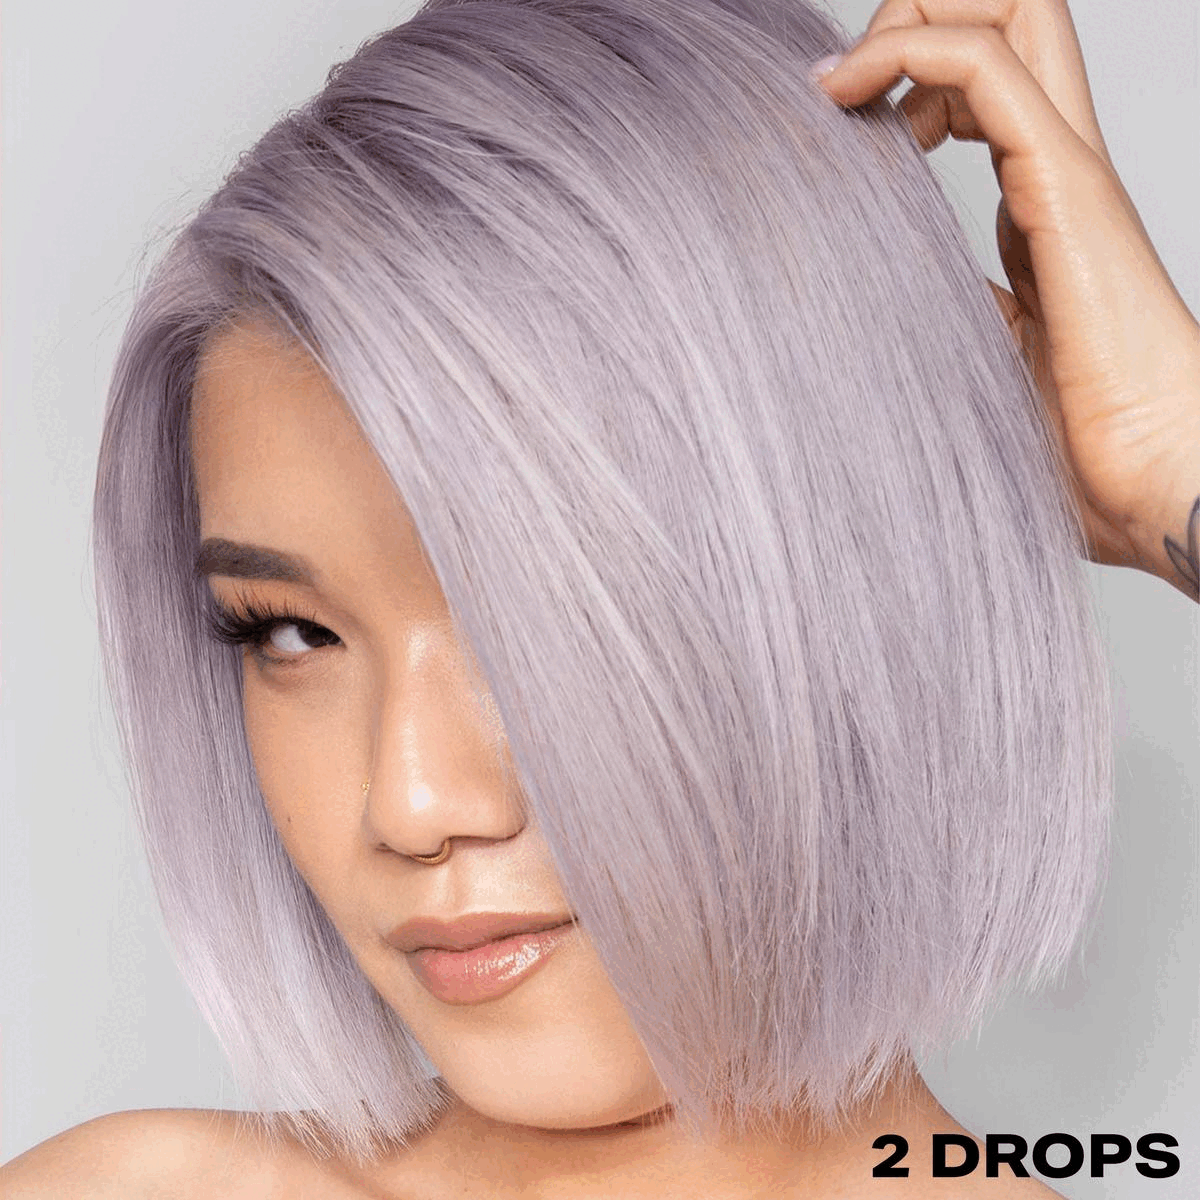 GIF transitioning between two images. Image 1- modelling hair that has used the 'SHRINE Drop It Lilac Toner'. Text: 2 drops. Image 2- showing before and after use of the toner. Text: 2 drops